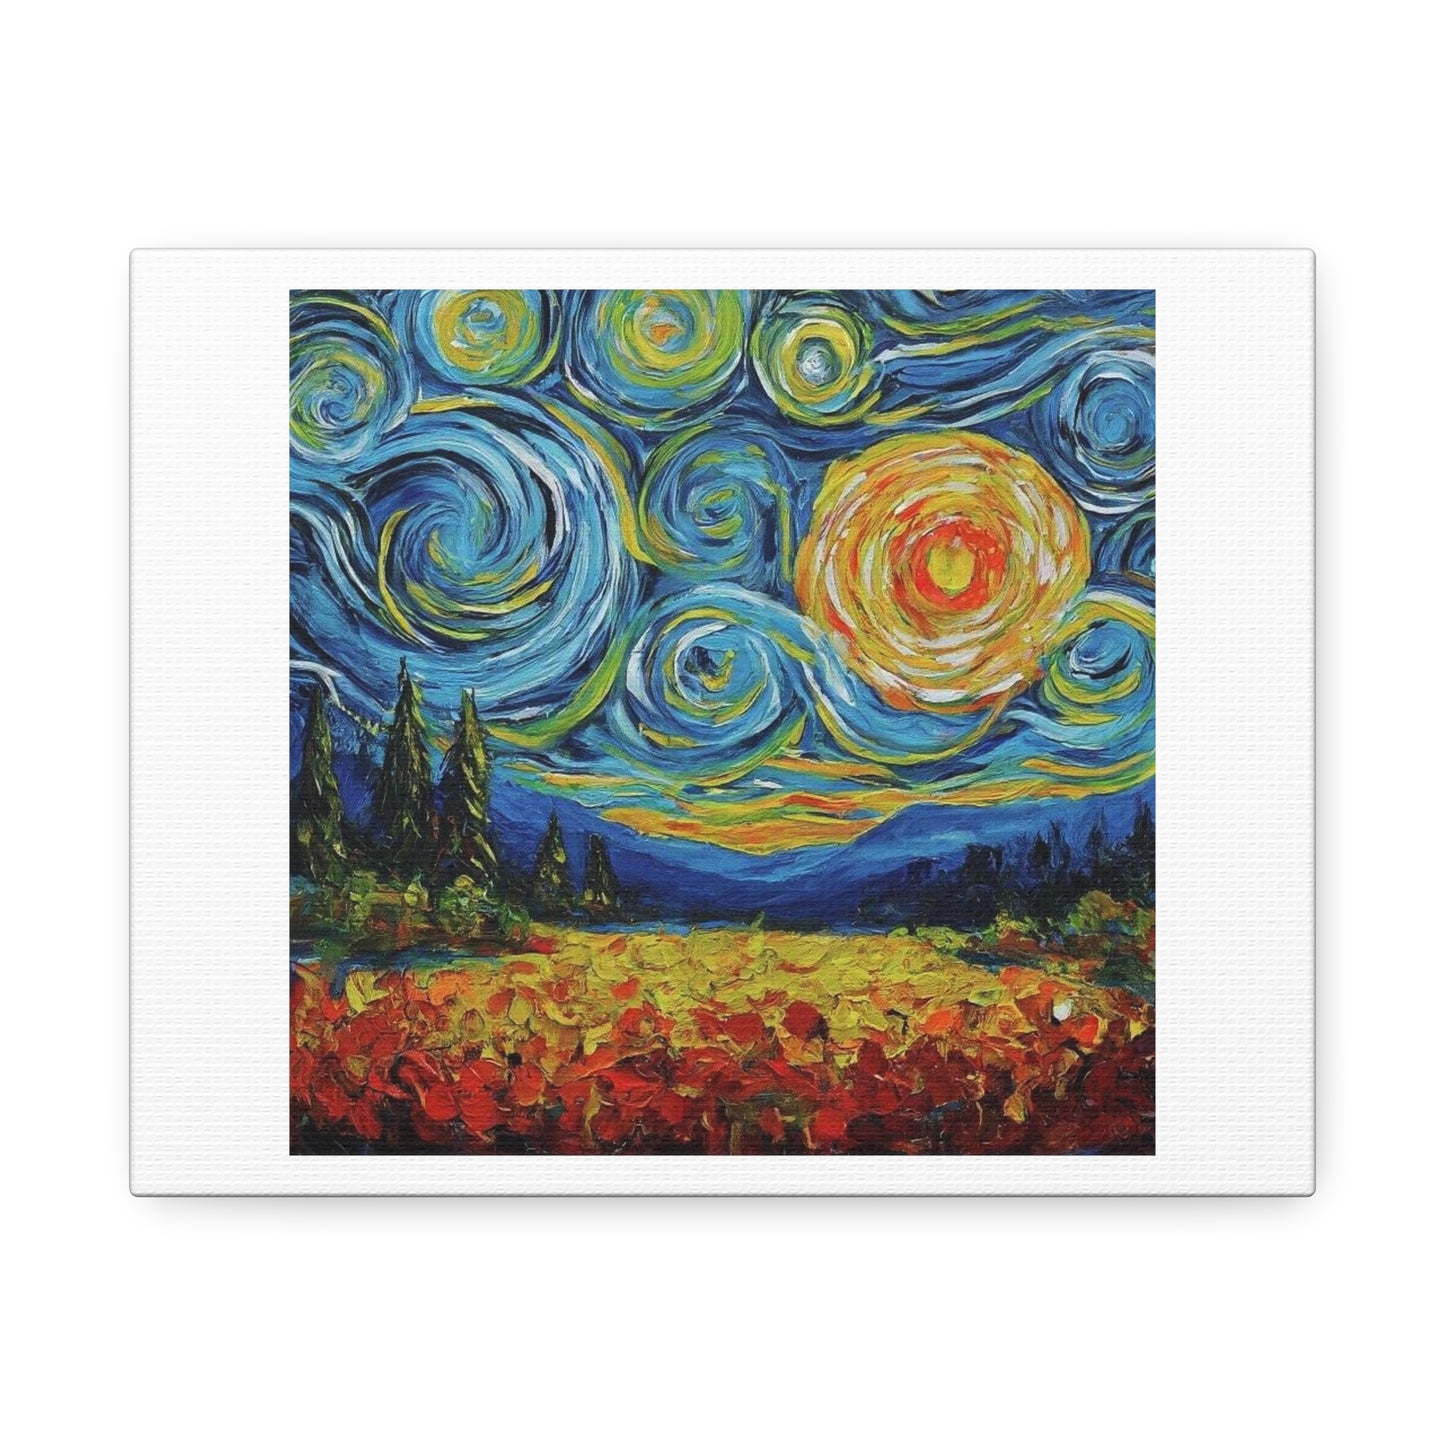 Van Gogh's Swirling Skies 'Designed by AI' Print on Canvas